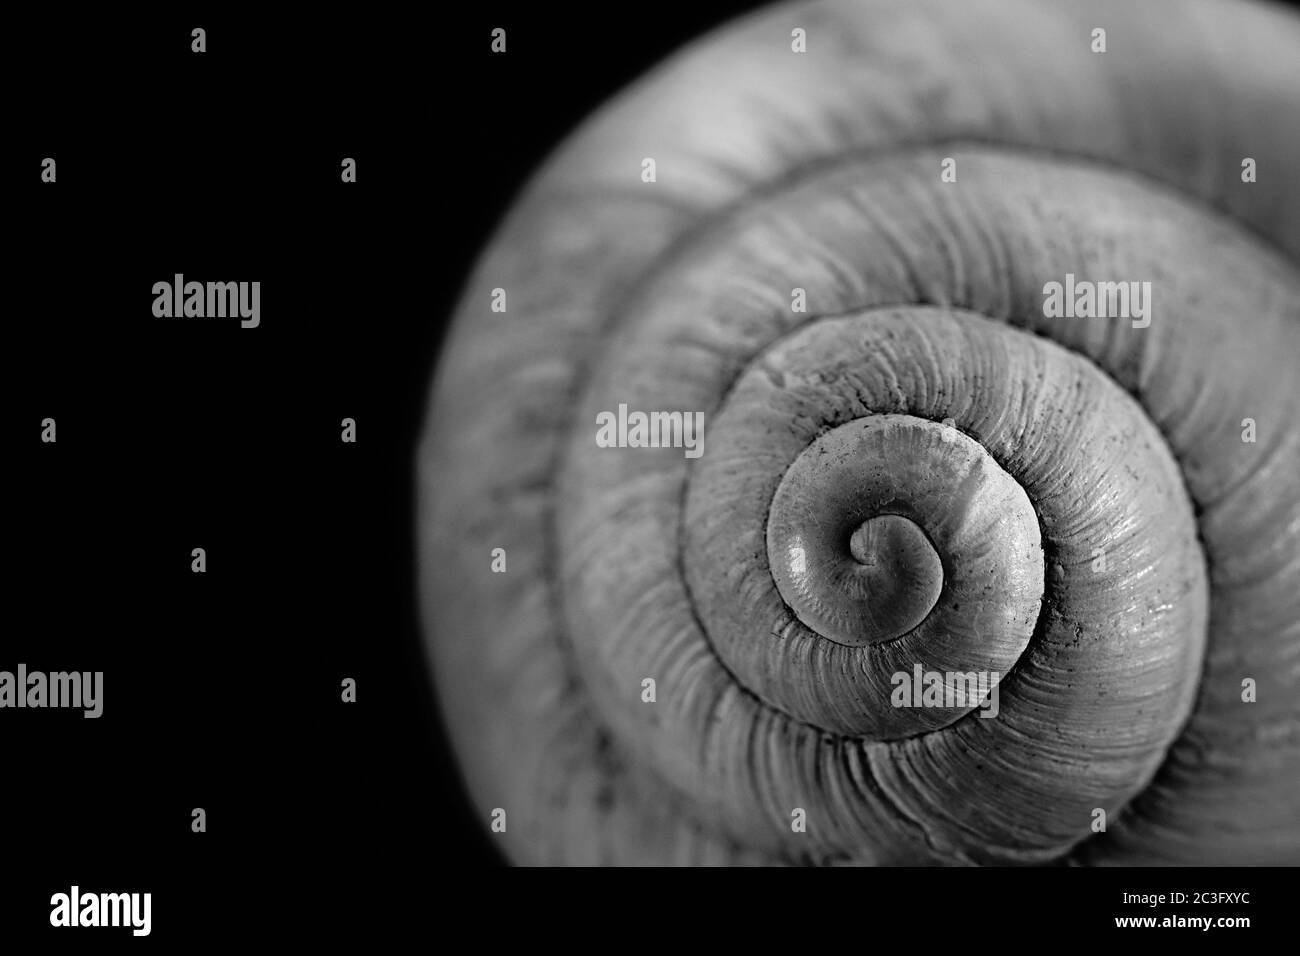 Black and white close-up view of a snail shell Stock Photo